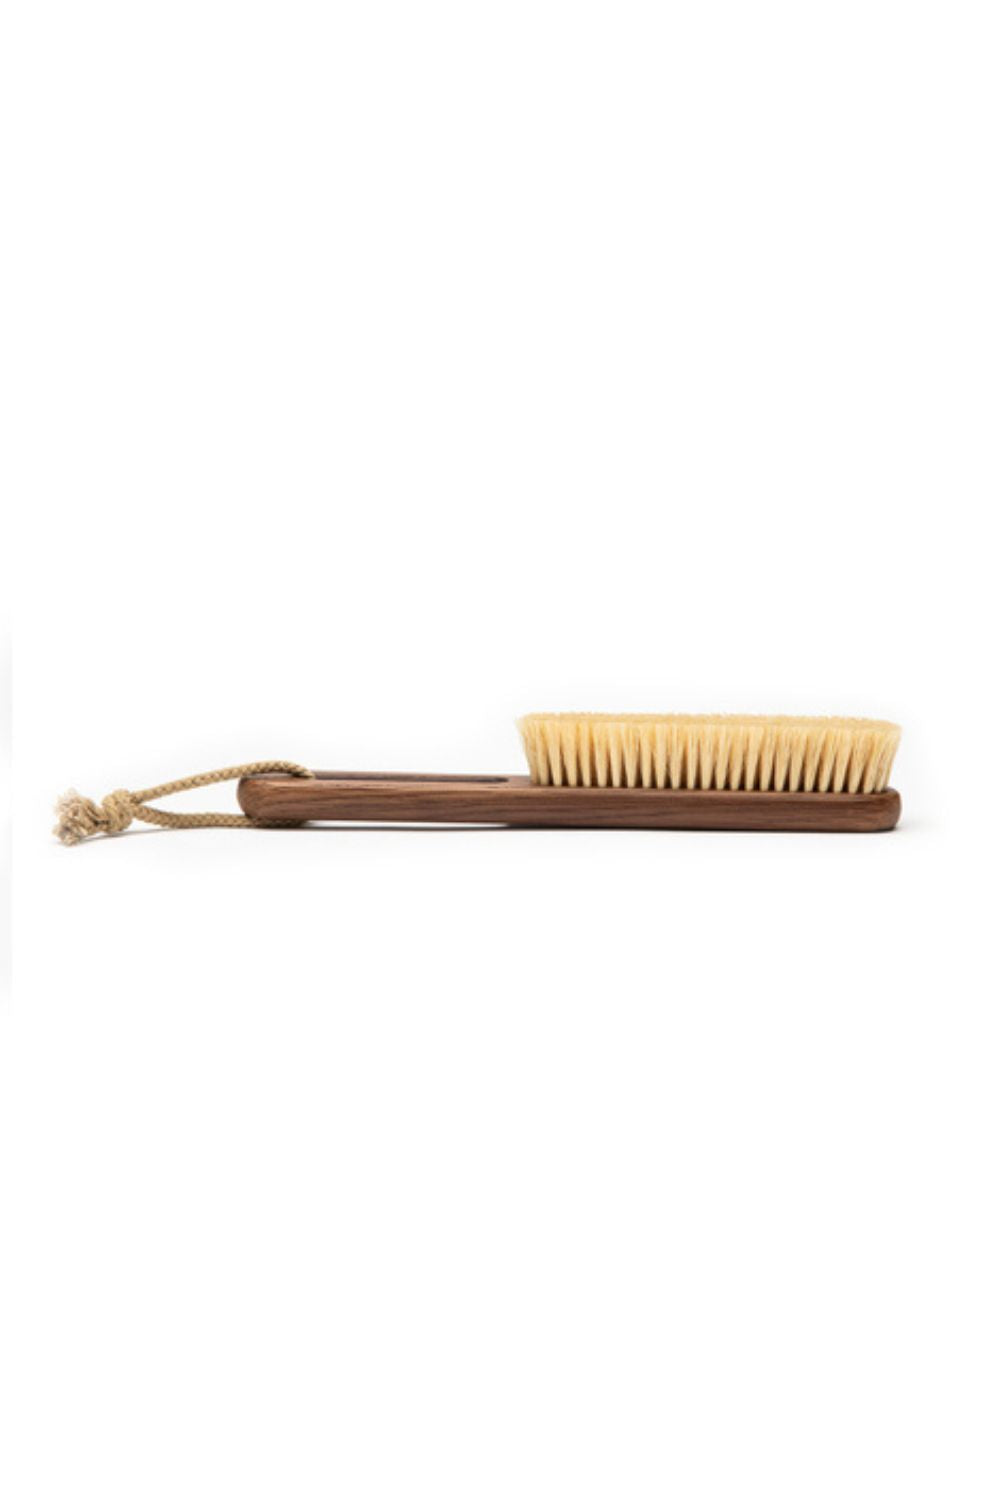 O'TAY Clothing Brush Care Products Nature